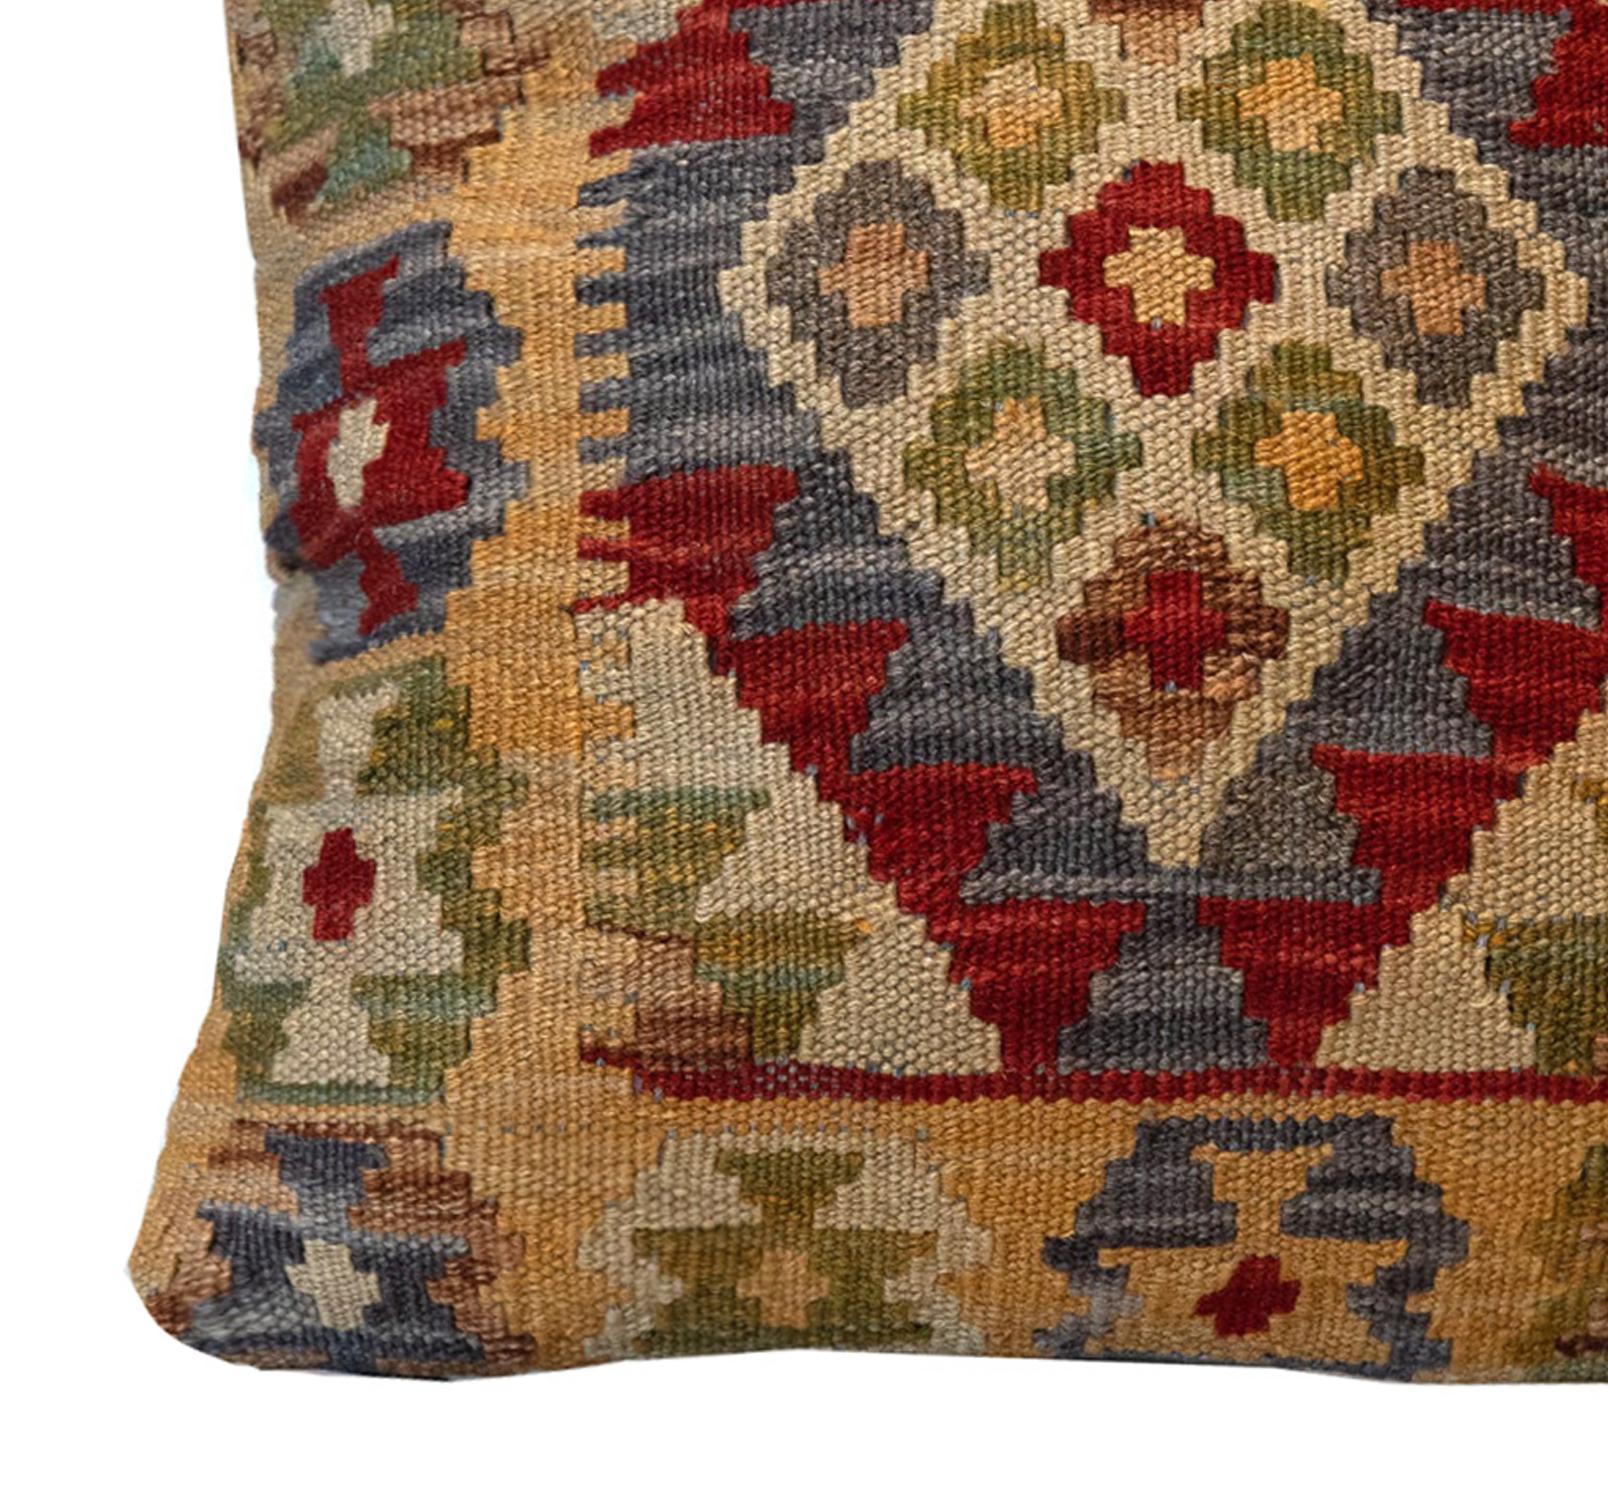 Rustic Hand Woven Kilim Cushion Cover Oriental Pillow Case Red Blue Beige Wool